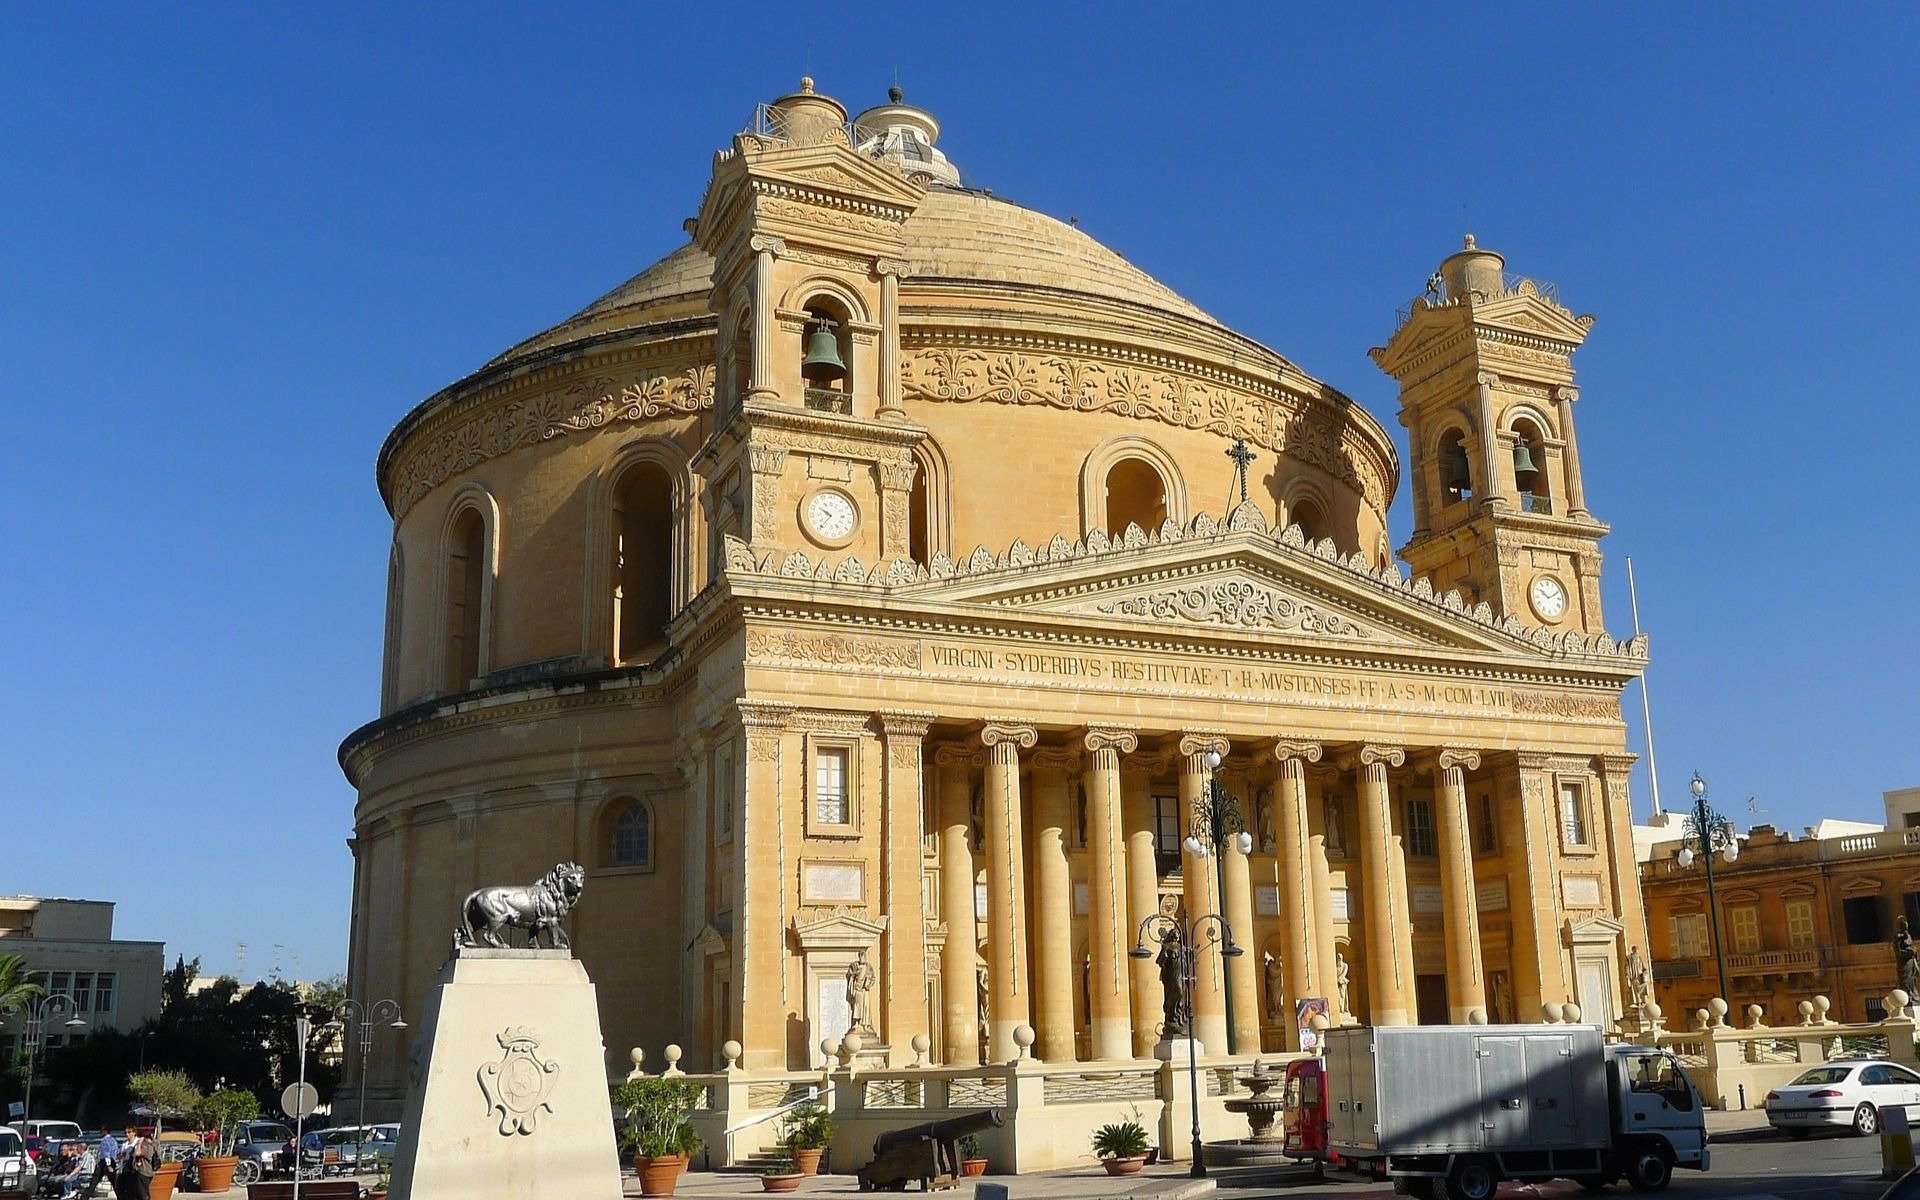 Cryptocurrencies Could Make Banks Obsolete Says Malta Bankers Association Chairperson